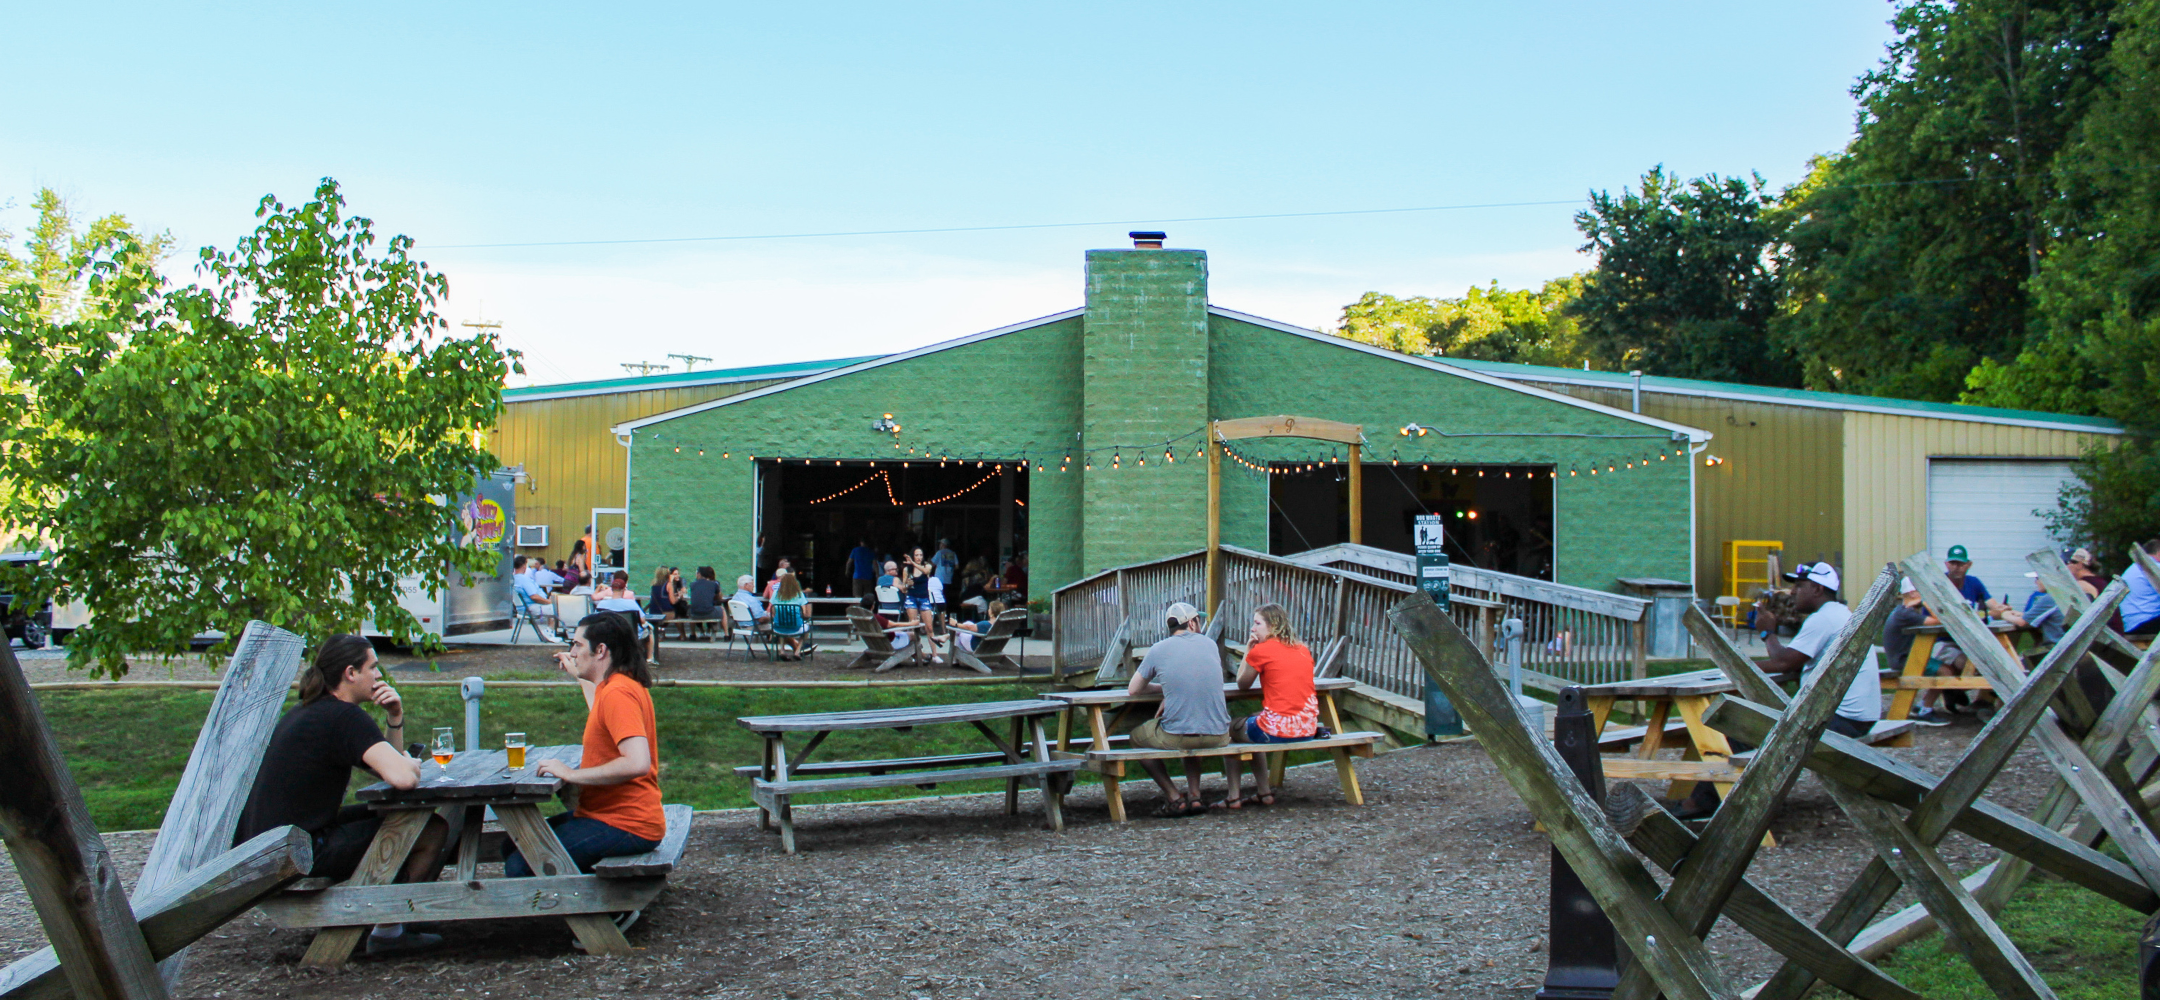 Outside of a green barn with picnic tables in front